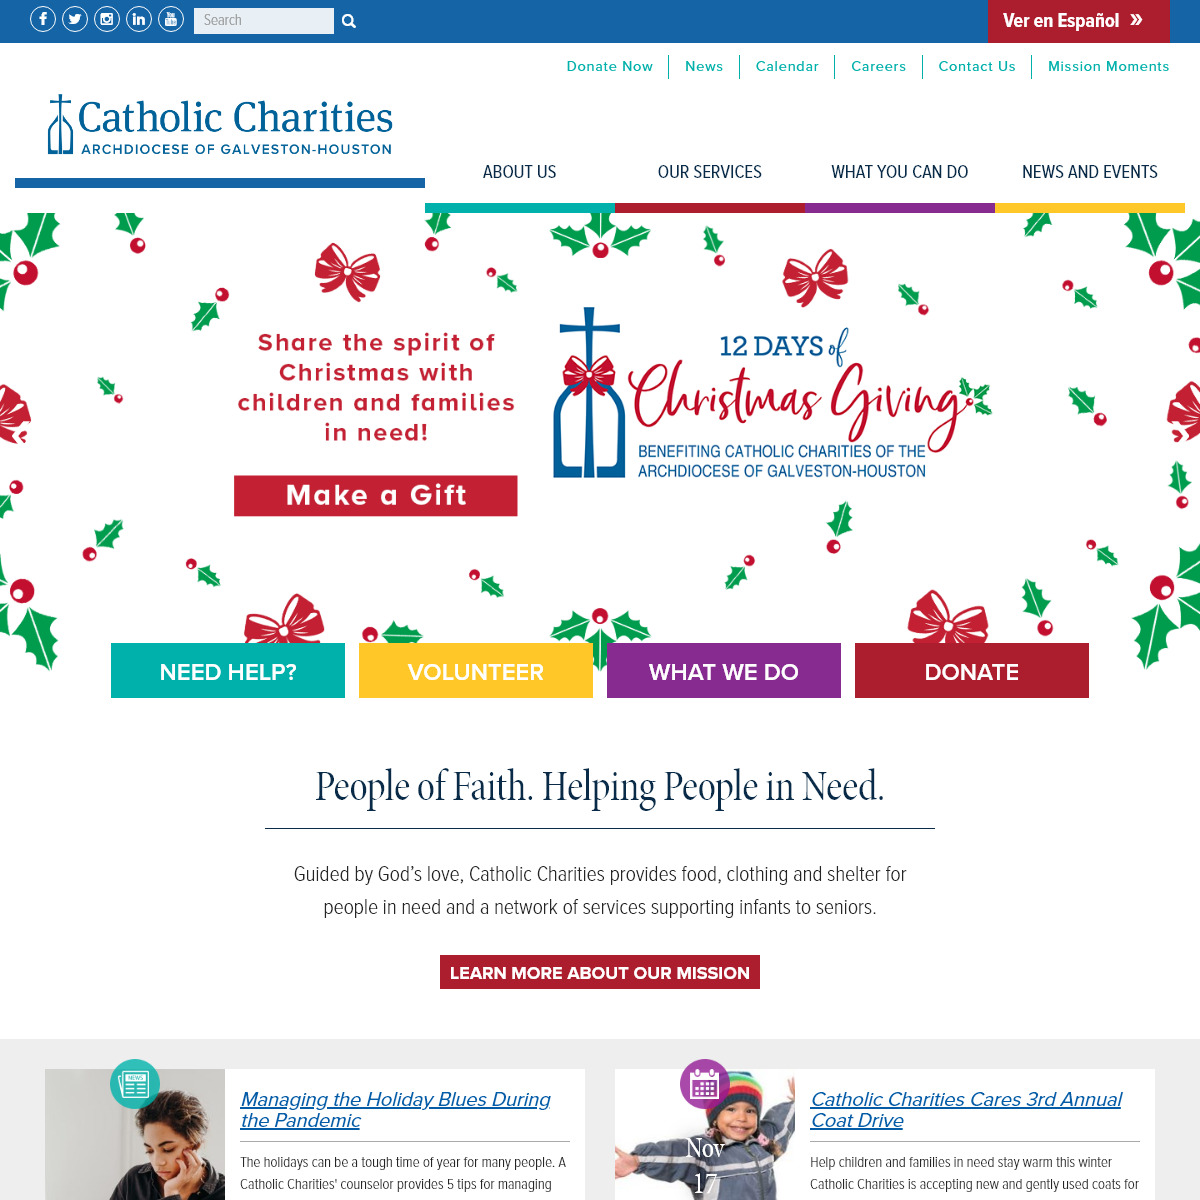 A complete backup of catholiccharities.org